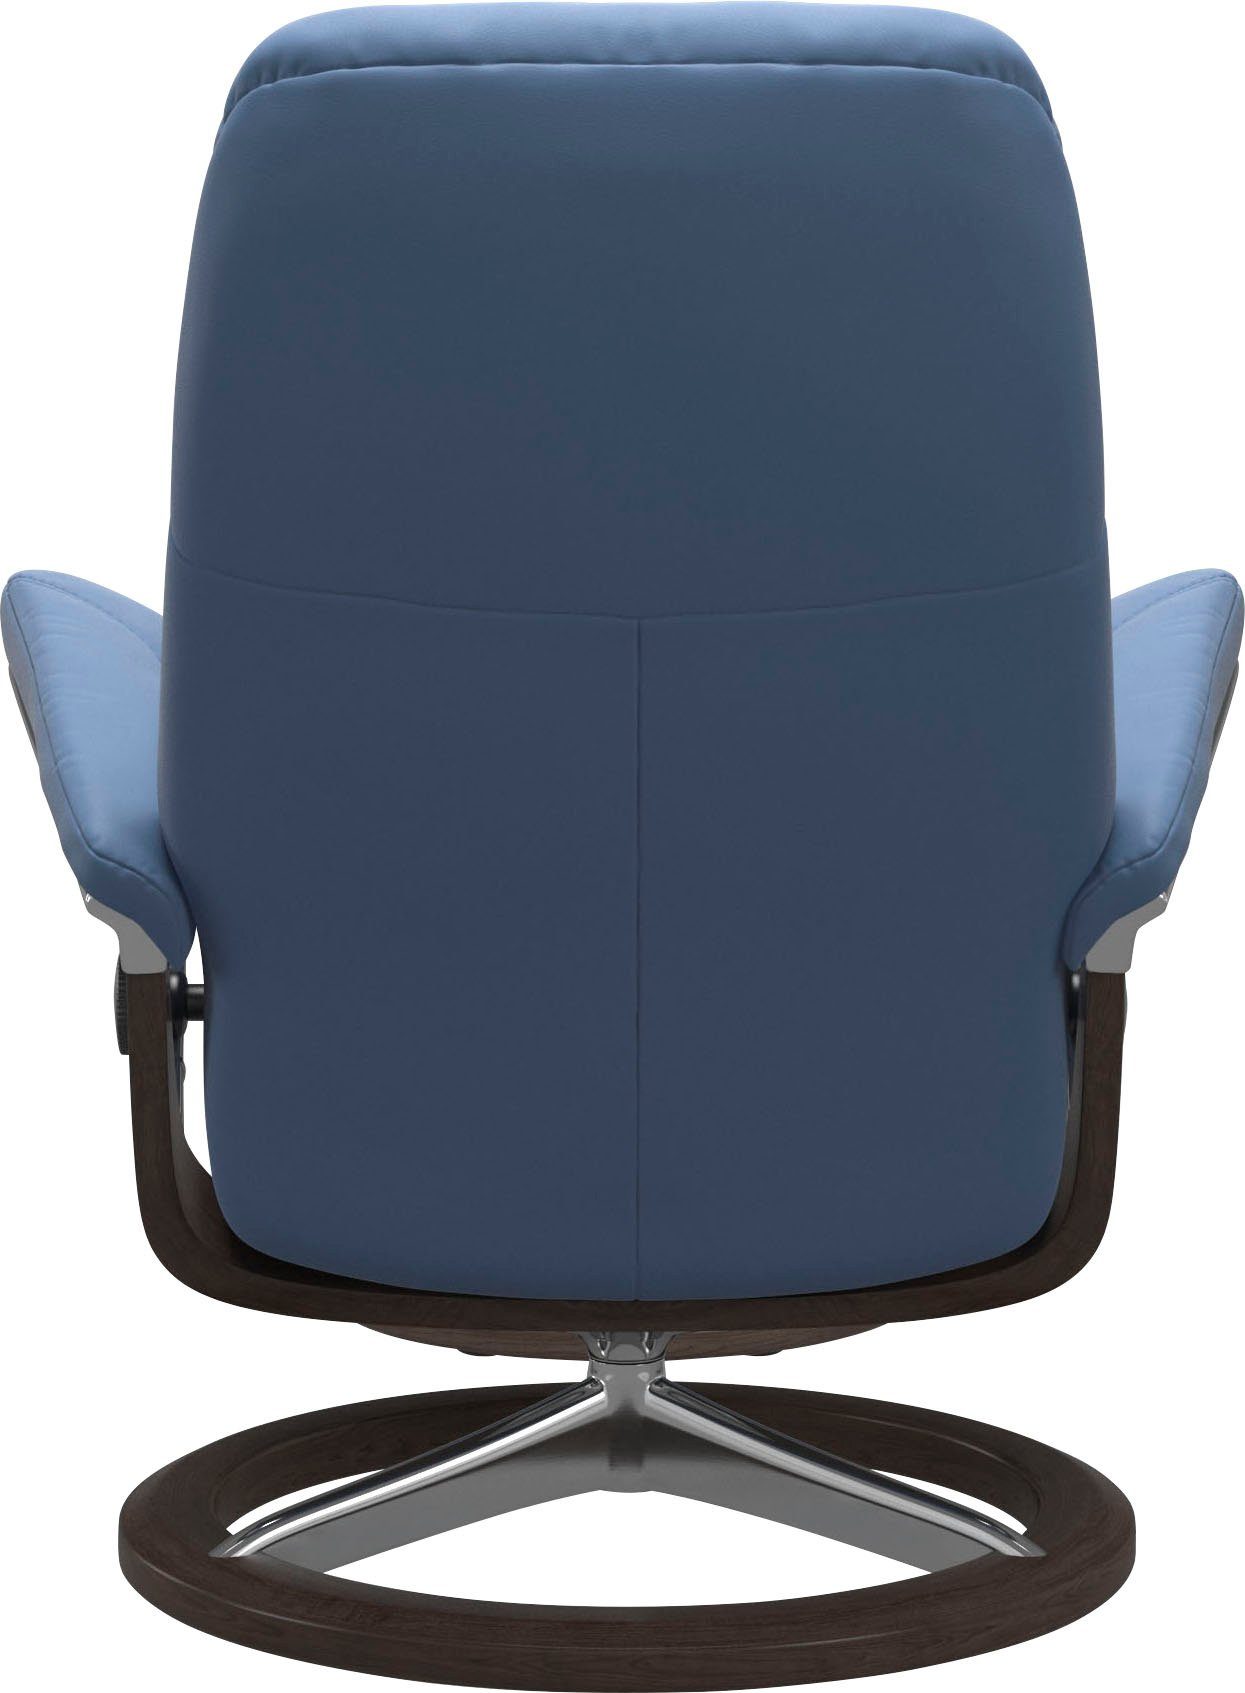 Base, L, Consul, Gestell Signature Größe Stressless® mit Wenge Relaxsessel